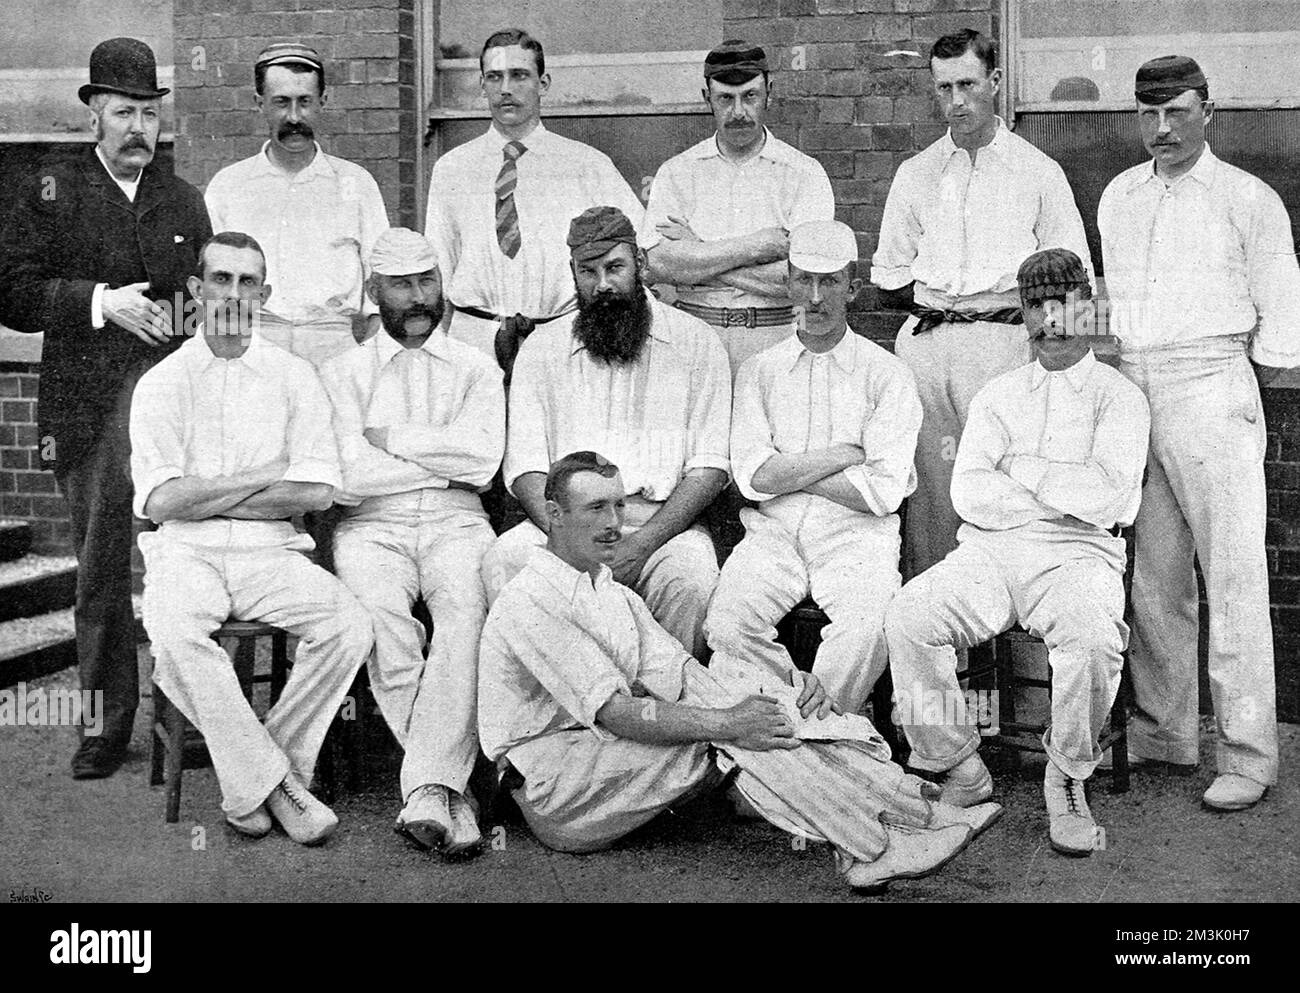 Photograph of Gloucestershire County Cricket team for the 1892 season. Back row, left to right: J.Smith (scorer), E. Sainsbury, S.A.P. Kitcat, Roberts, Murch, Painter. Middle row, left to right: Captain A.H. Luard, E.M. Grace, Dr. W.G. Grace (captain), Woof, O.G. Radcliffe. Front row: Board. Stock Photo